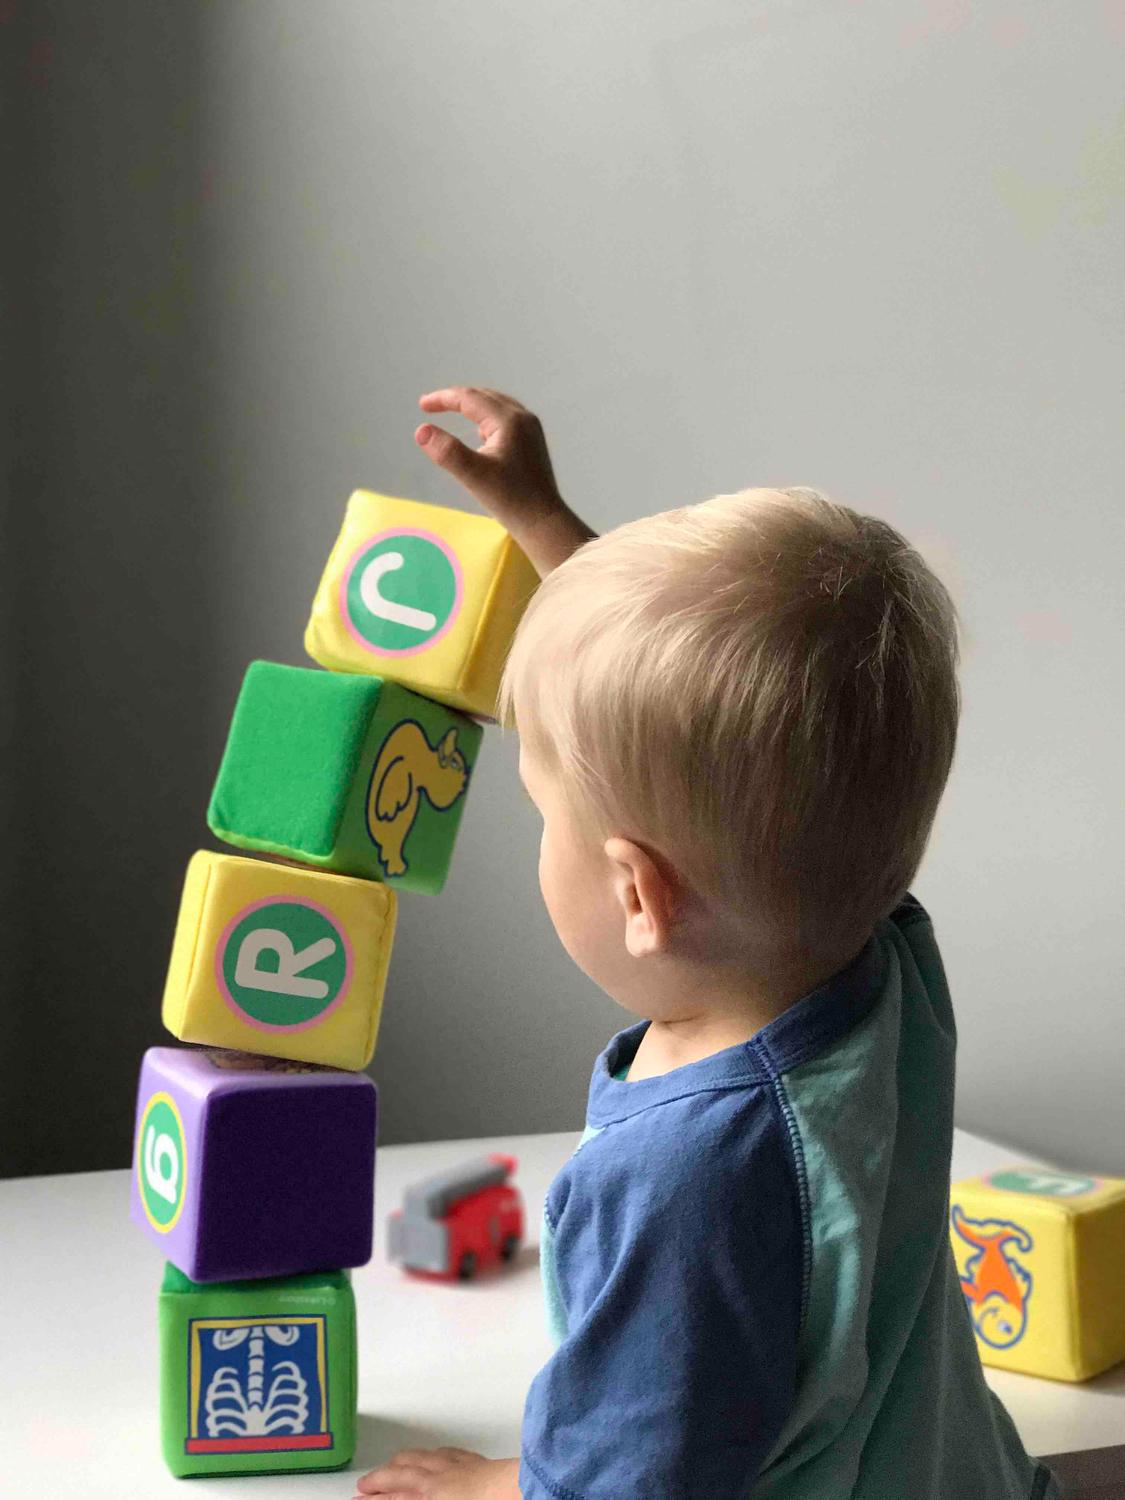 A toddler aged child with blonde hair stacks soft blocks on a table.